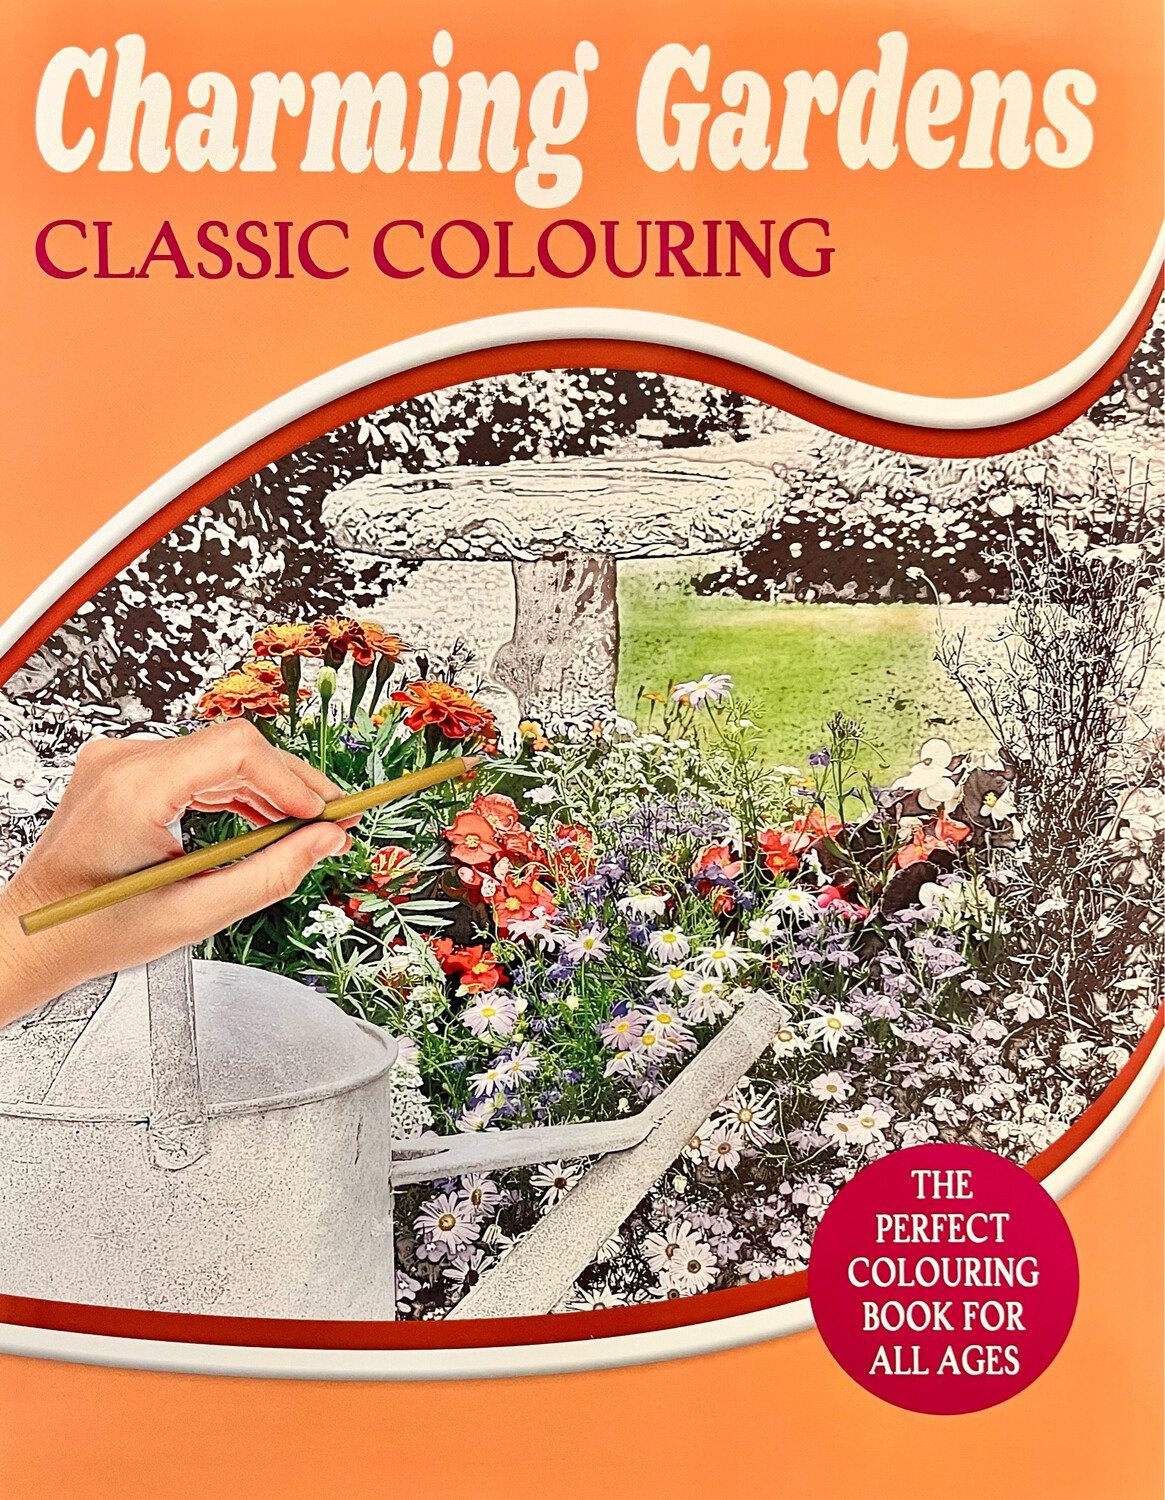 Charming Gardens Classic Colouring